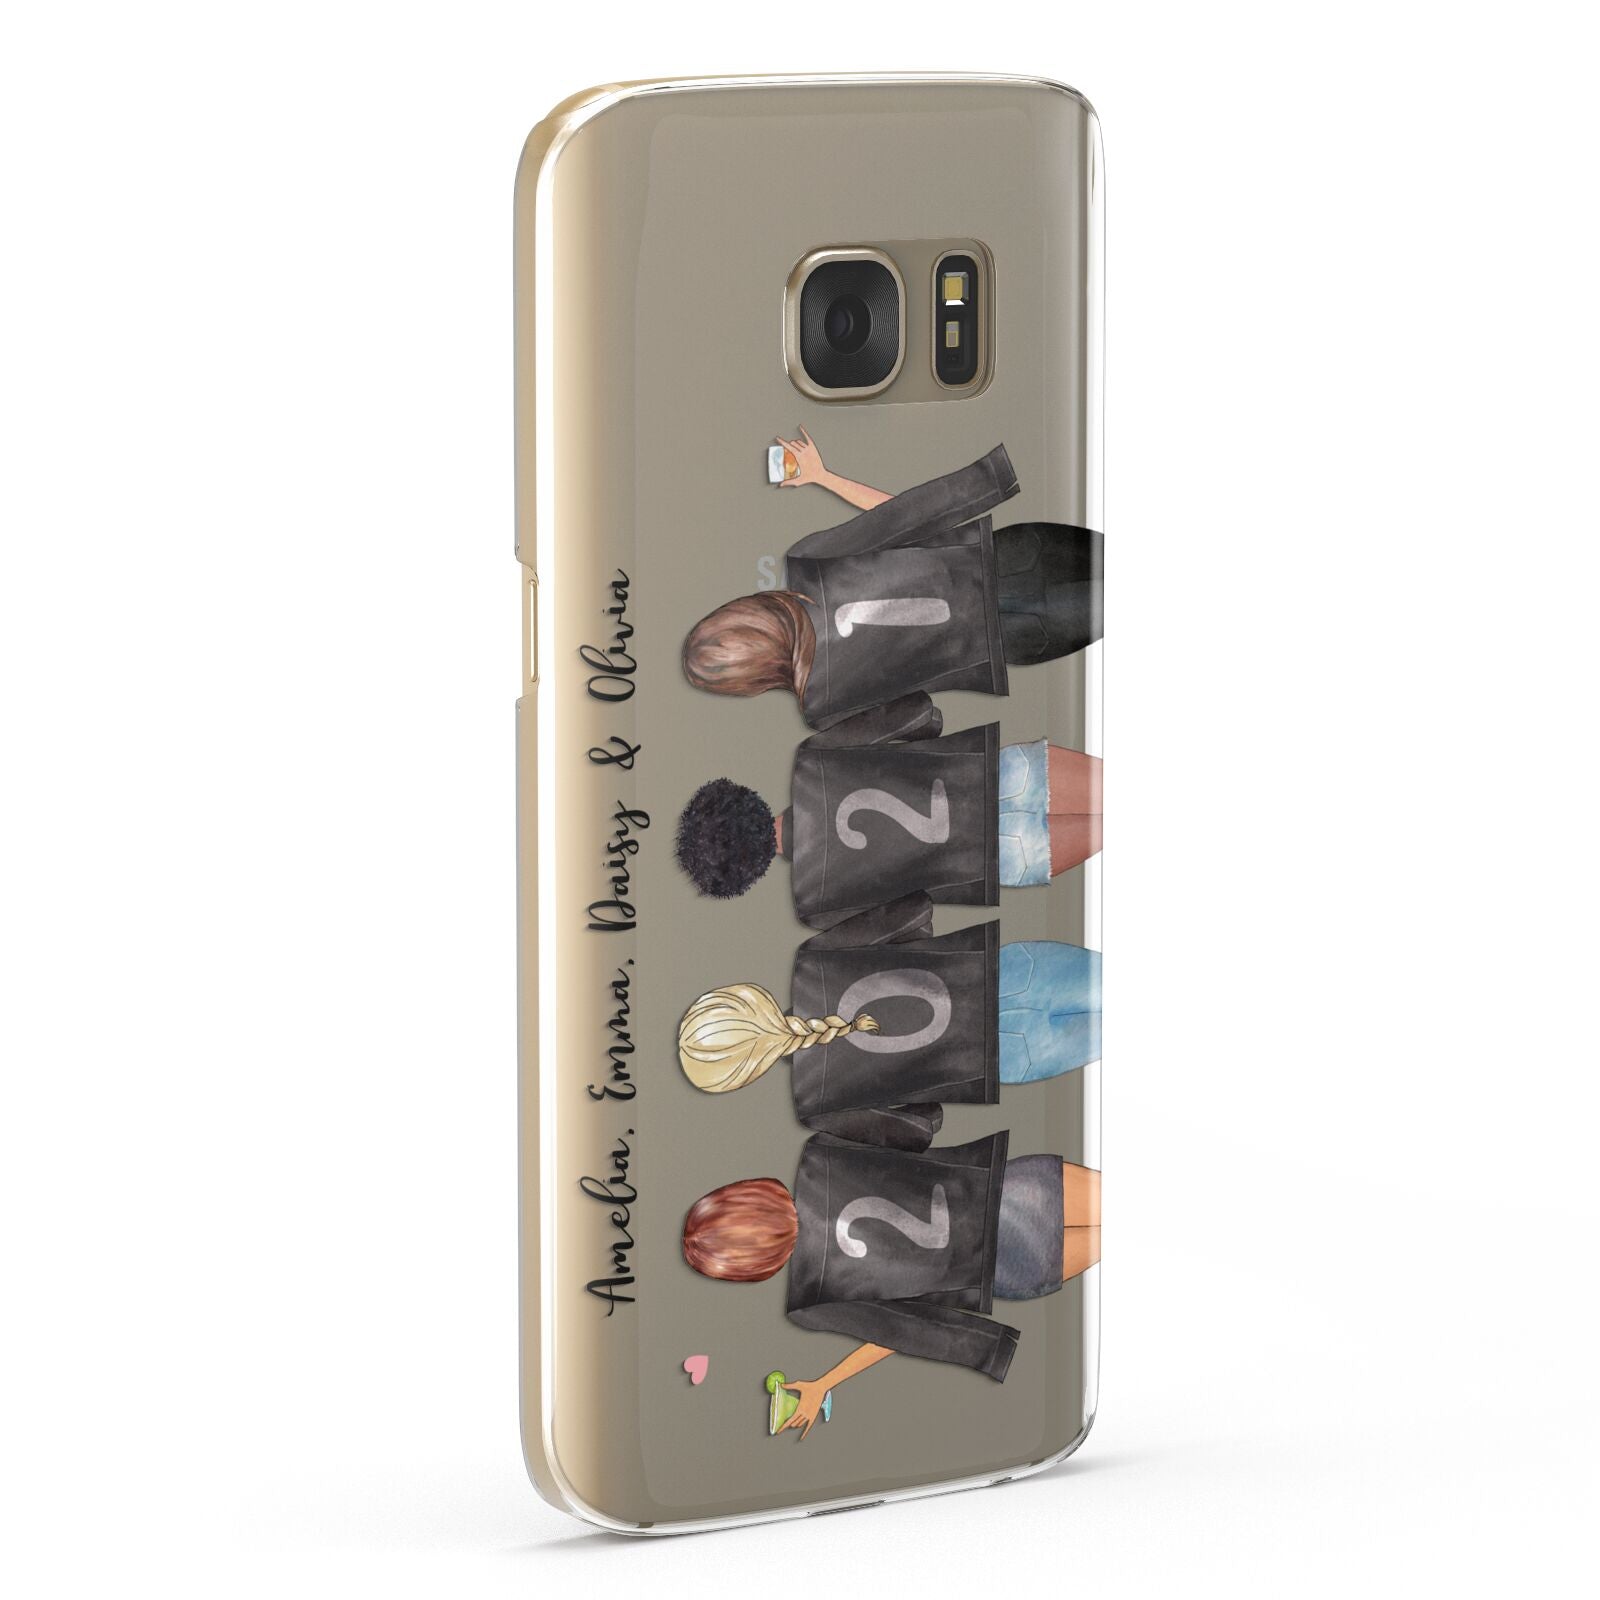 4 Best Friends with Names Samsung Galaxy Case Fourty Five Degrees